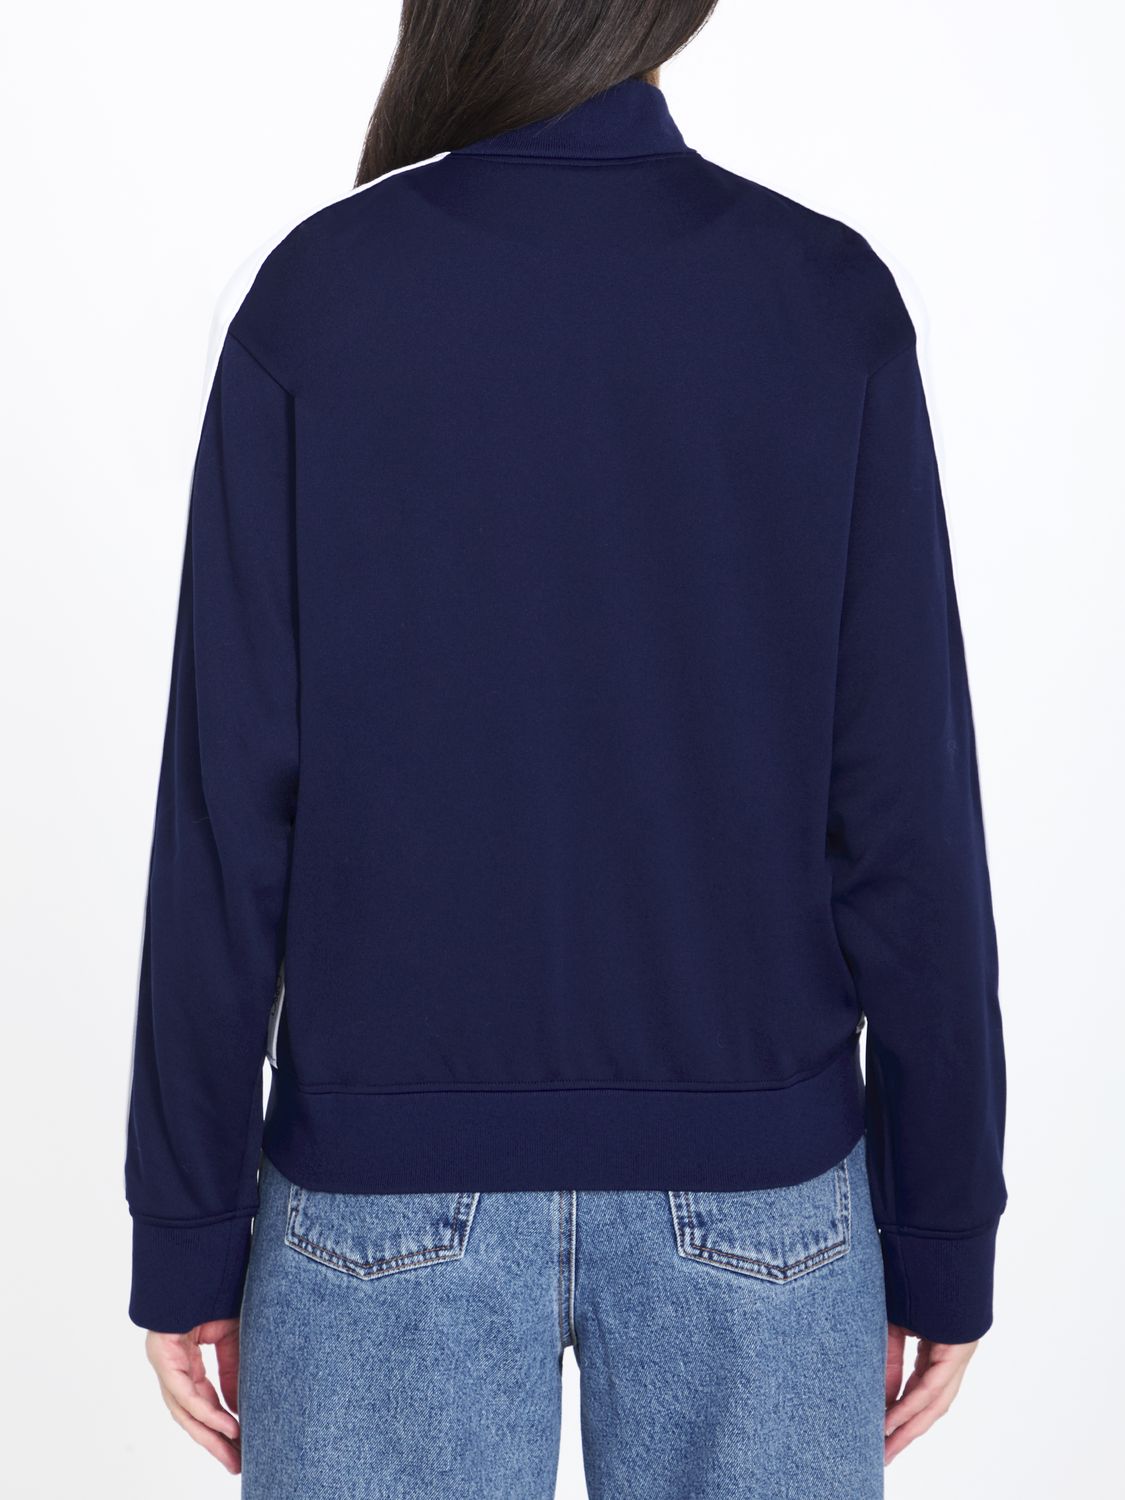 LOEWE Navy Blue Tracksuit Jacket with Contrast Bands for Women